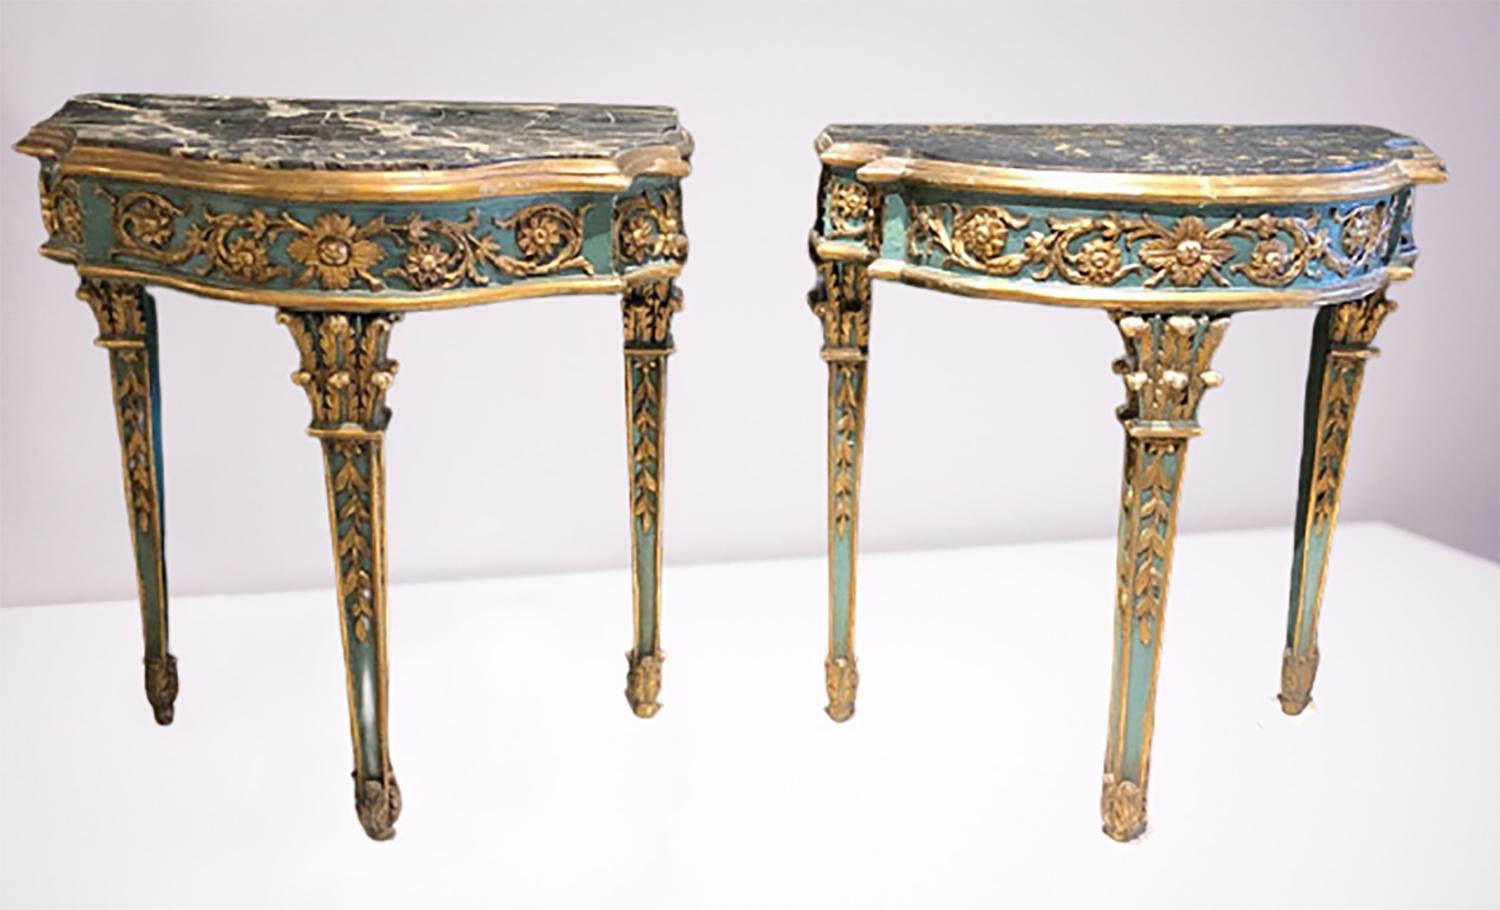 Pair of 19th century French console tables. A magnificent compatible pair of parcel-gilt and painted marble-top console or sofa tables that are simply stunning. The fine pair of carved gilt decorated side tables have the best workmanship anyone